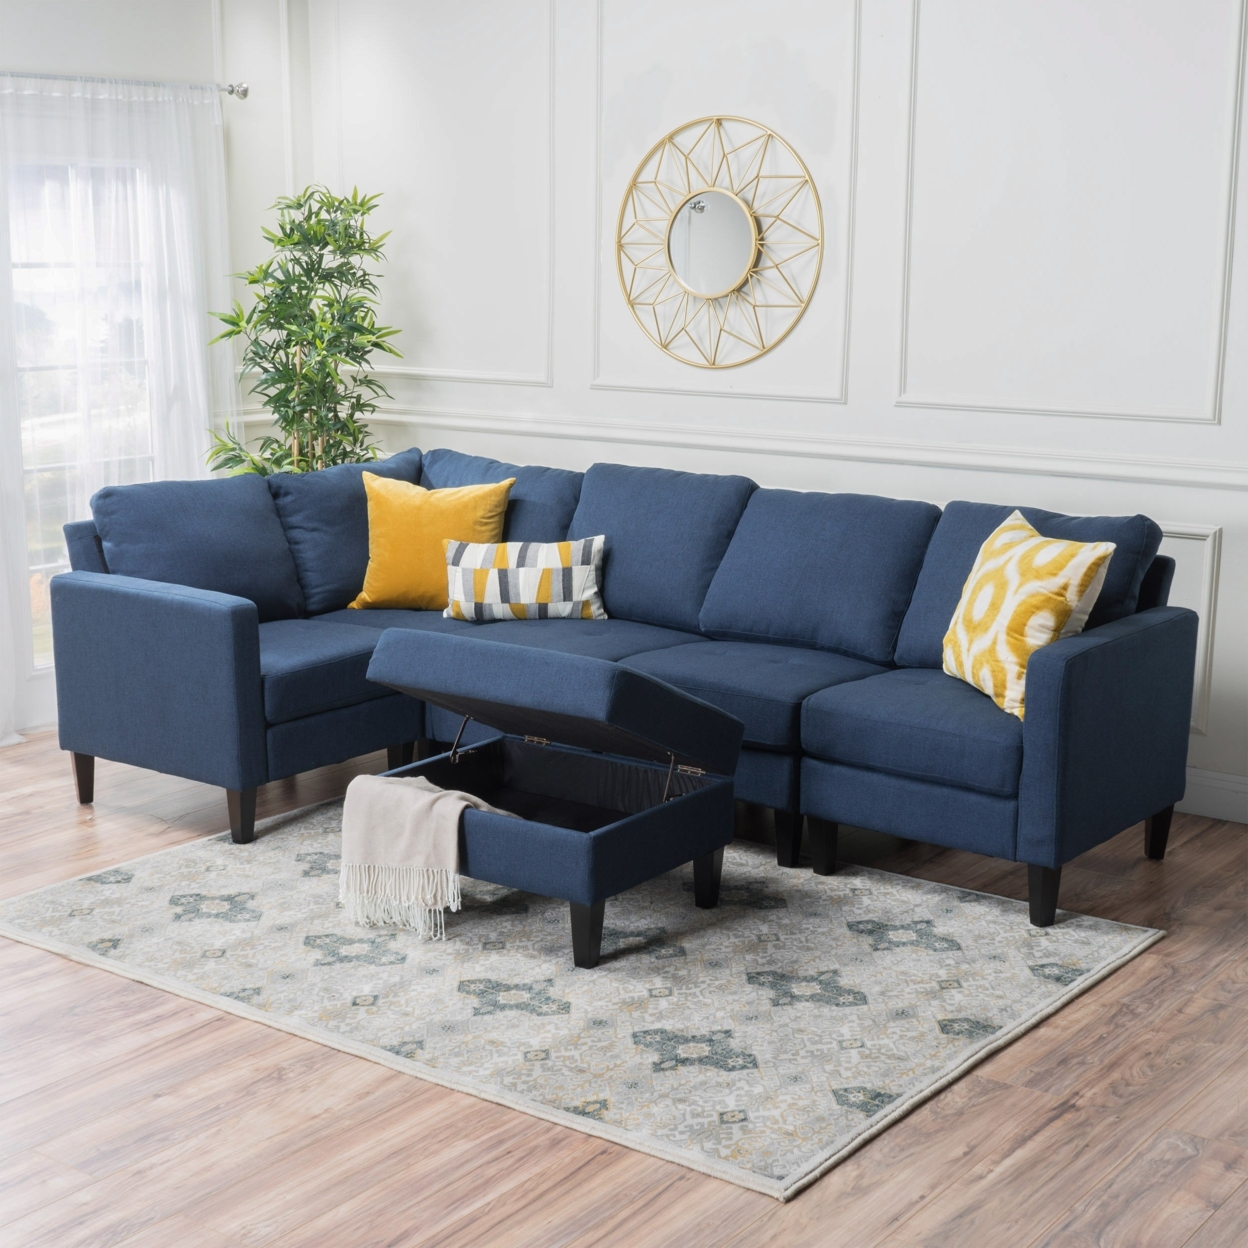 Carolina Fabric Sectional Couch With Storage Ottoman - Light Gray